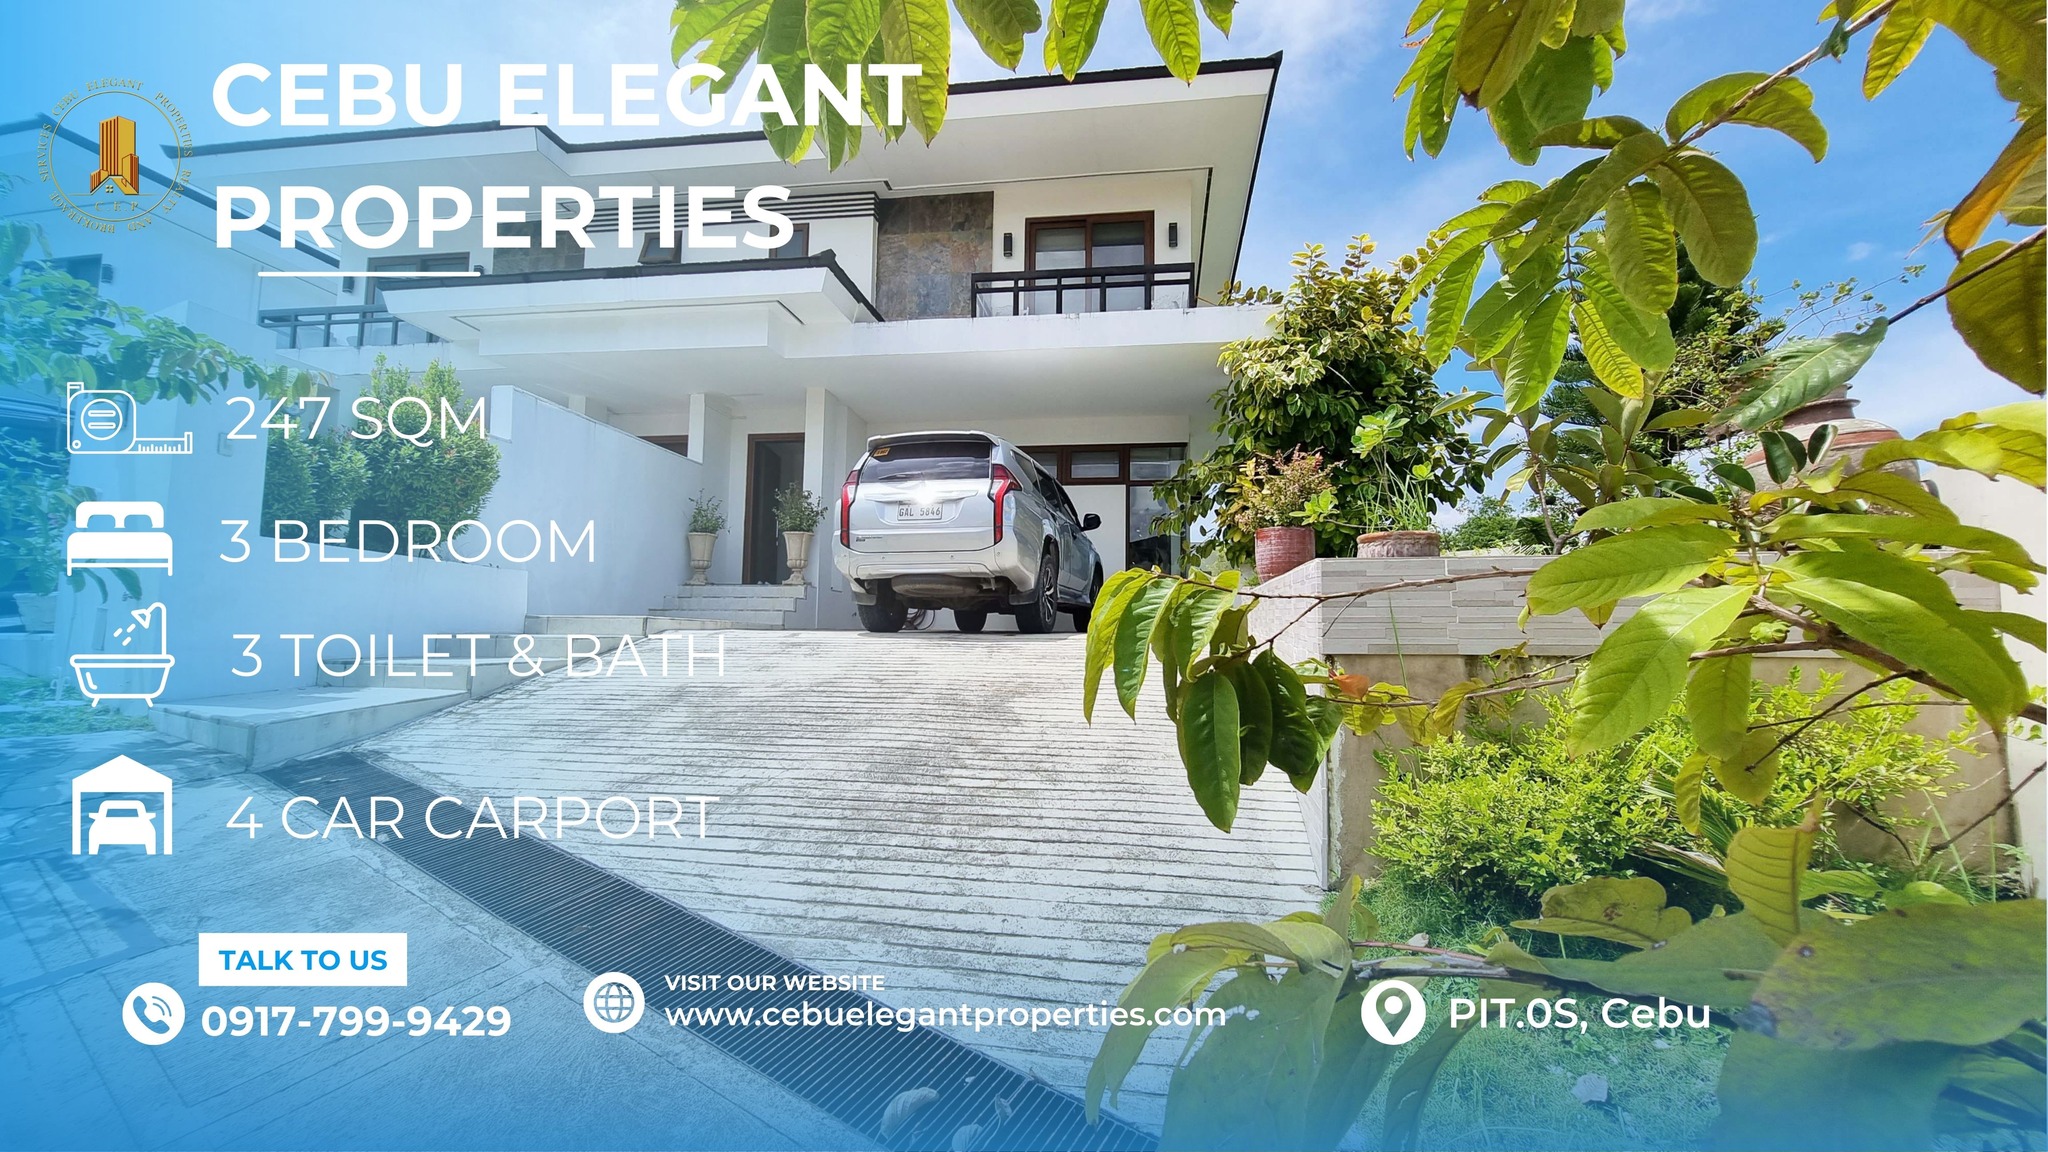 Duplex House and Lot with 3 Bedrooms For Sale Pit-os, Cebu